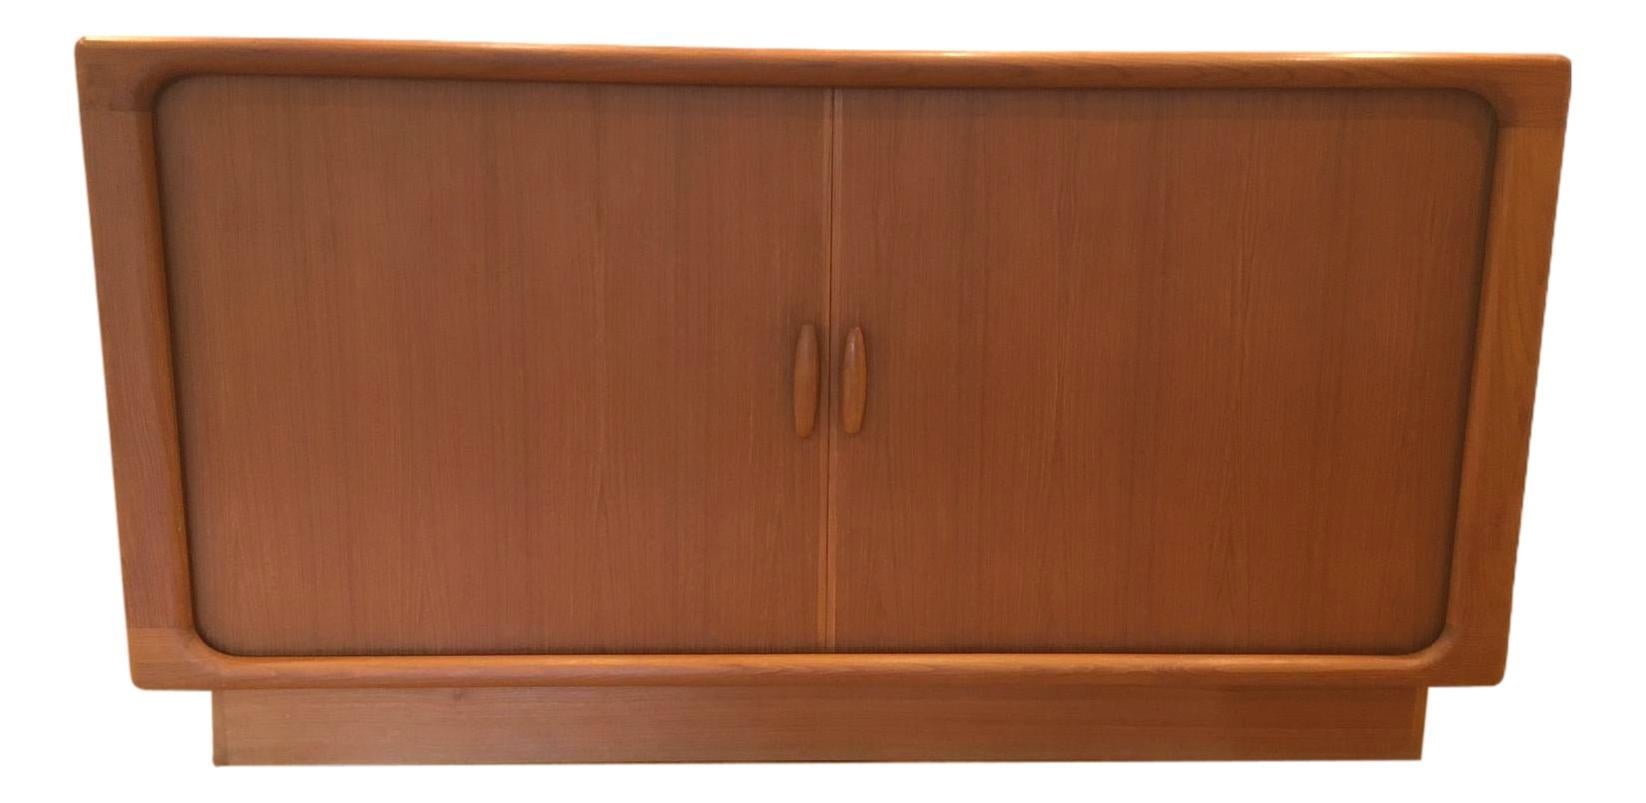 Mid century credenza, with tambour doors, designed and manufactured by Dyrlund of Denmark. Produced in beautifully grained Teak this piece is another classic example of Dyrlund's Craftsmanship. The sheer quality of the finish is why they were one of